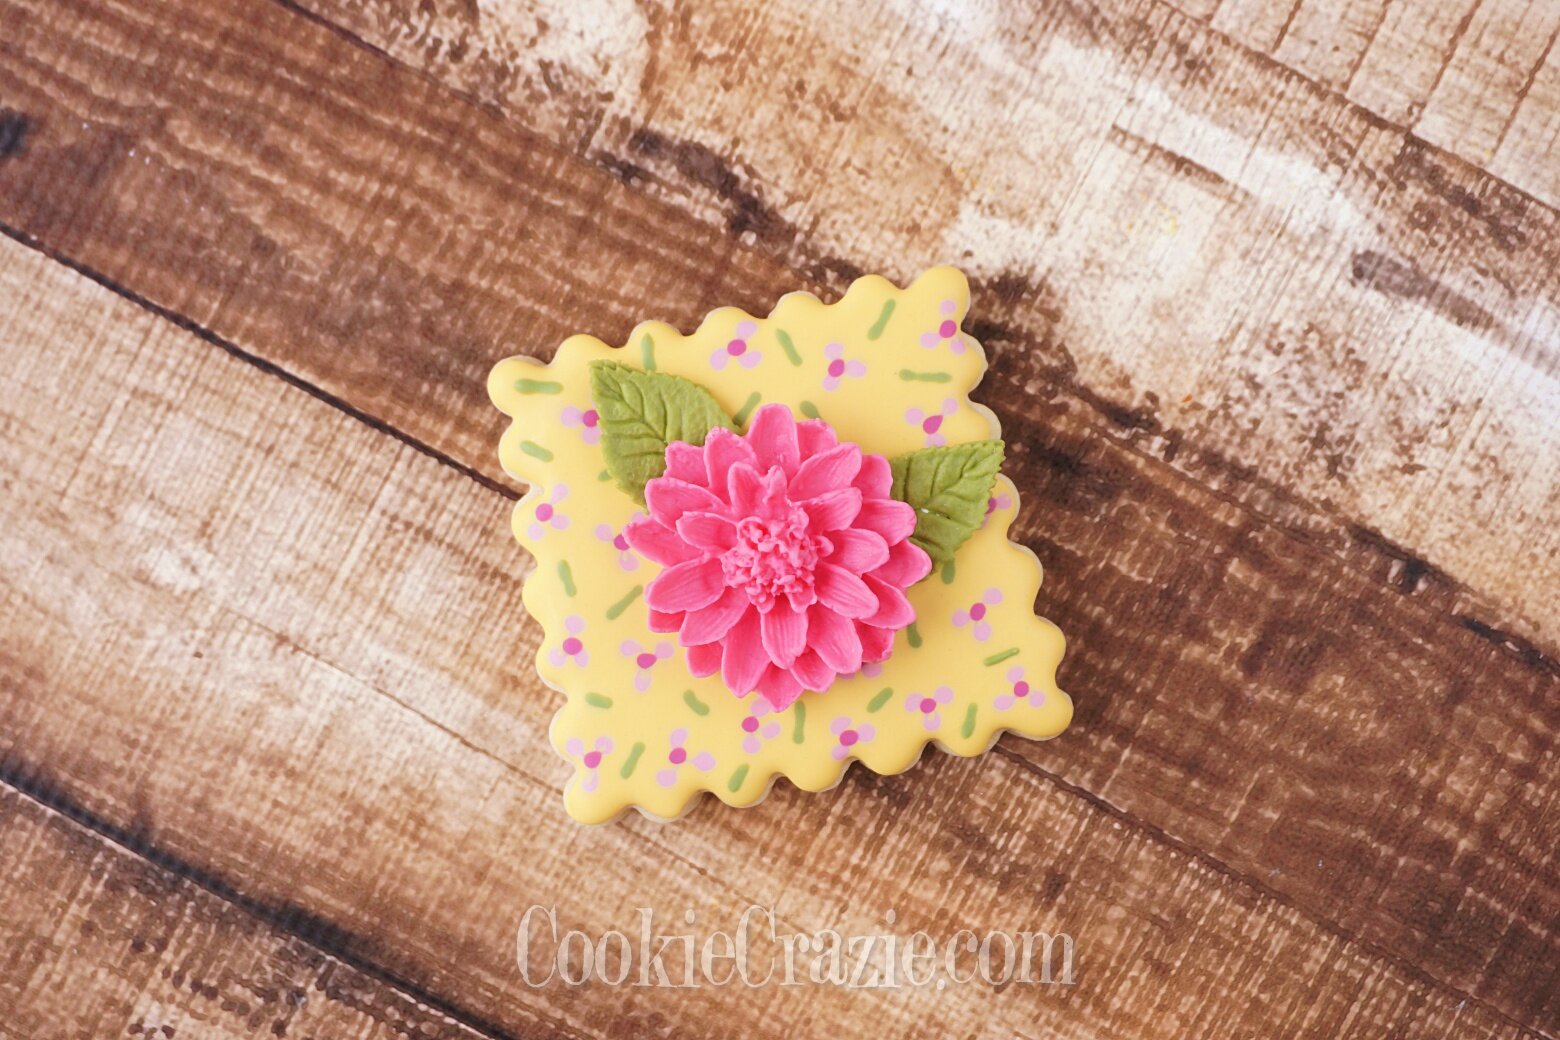  Floral Square Decorated Sugar Cookie YouTube video  HERE  